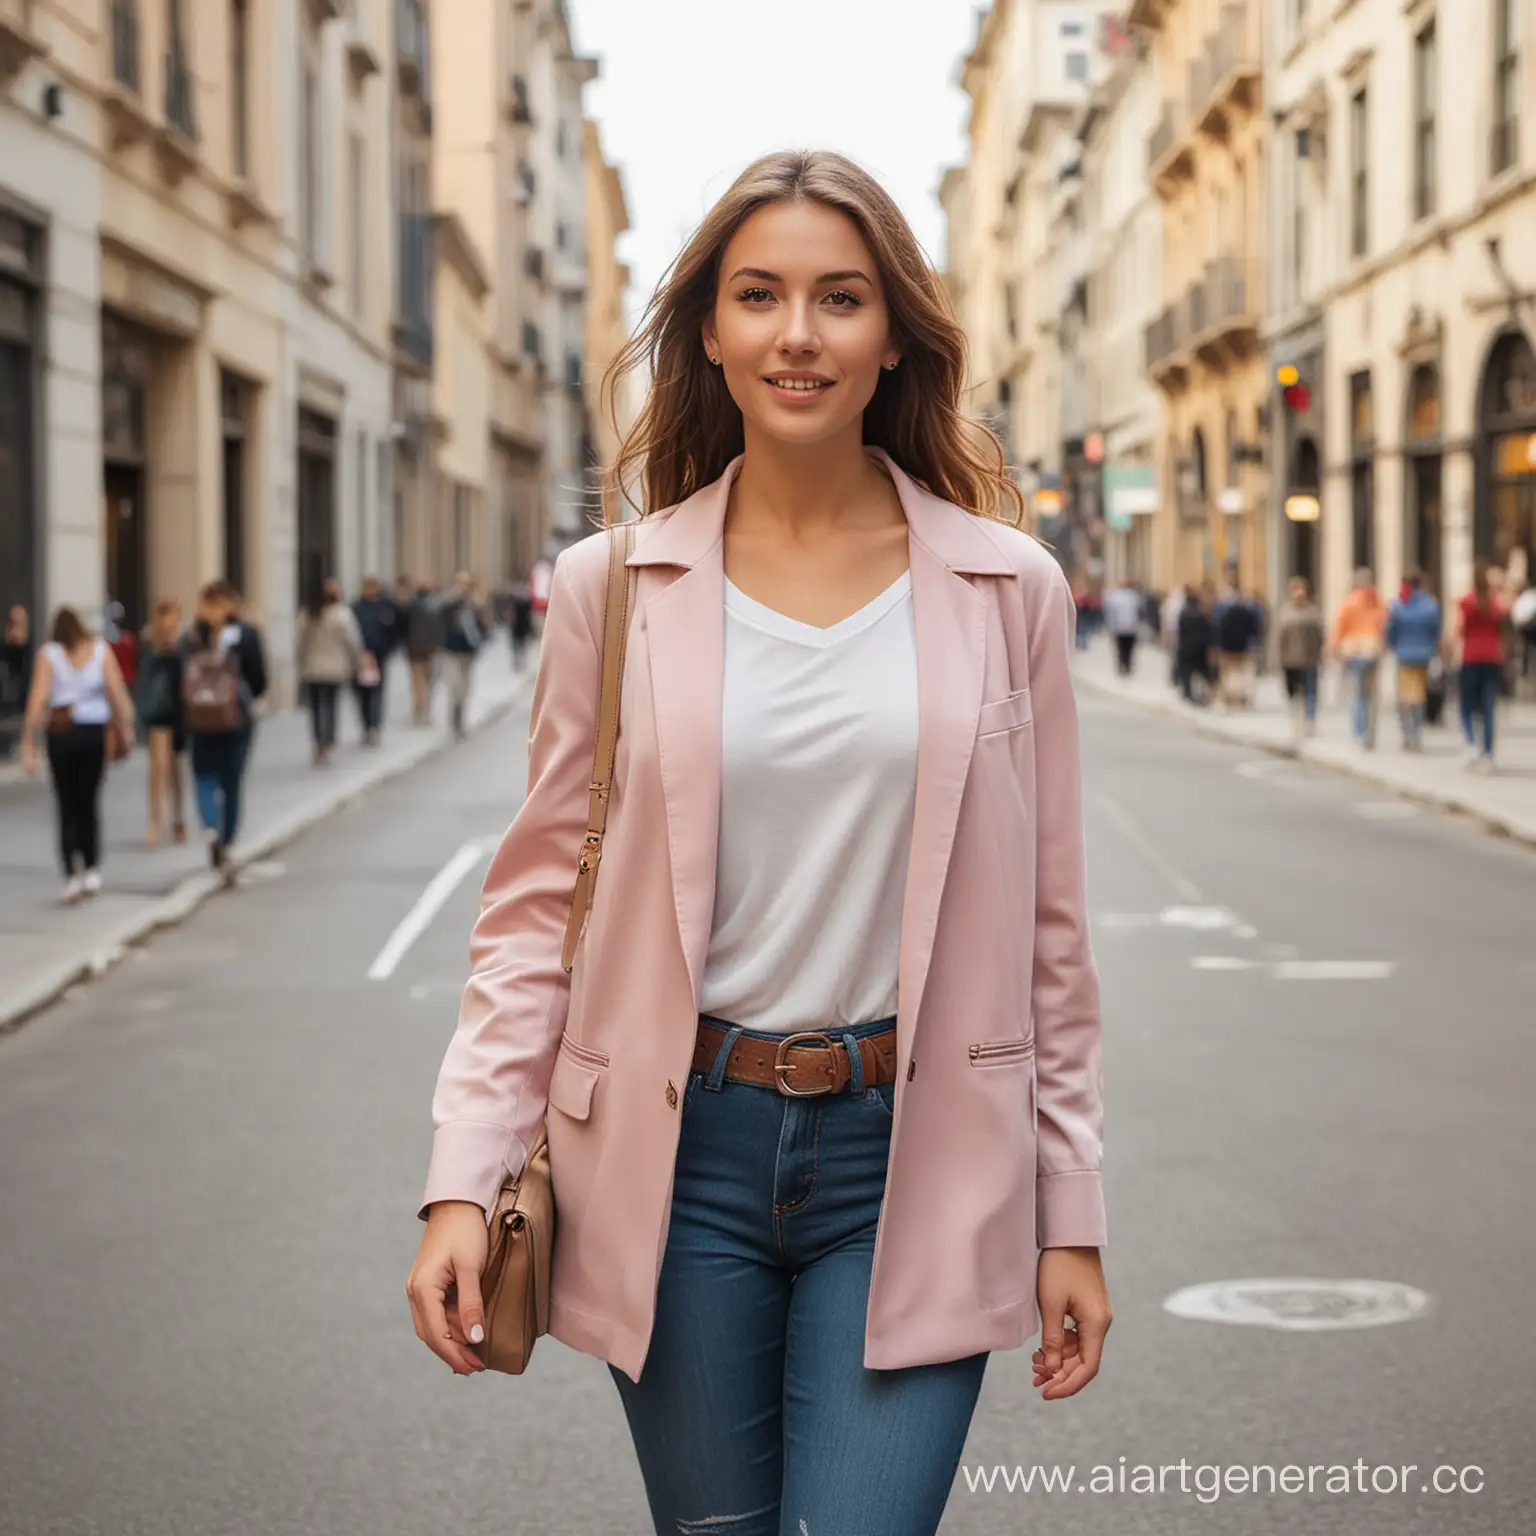 Fashionably dressed Young woman in the city